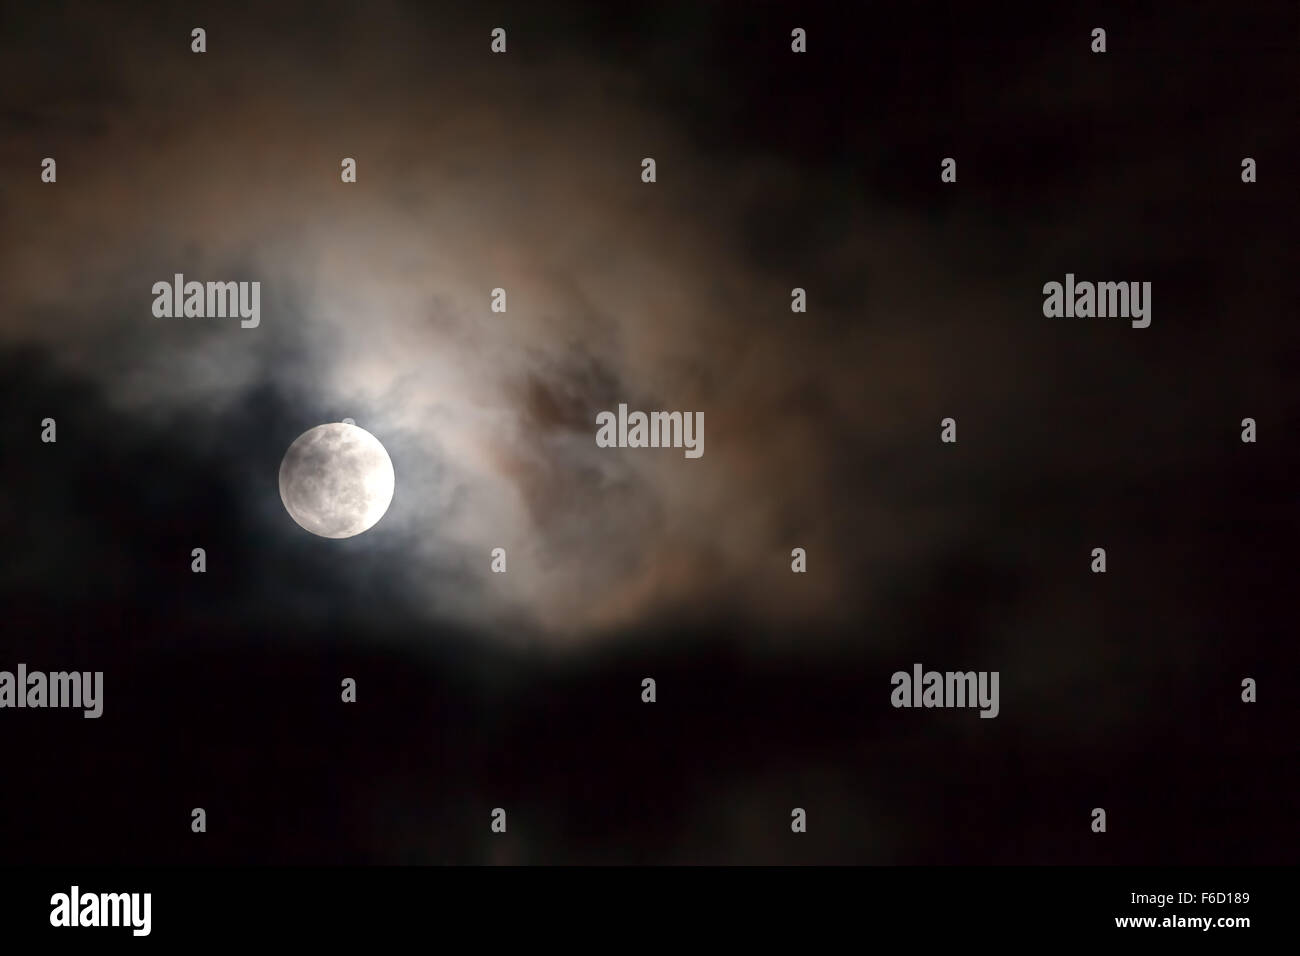 Full Moon Over Dark Black Sky With Stars And Clouds Stock Photo